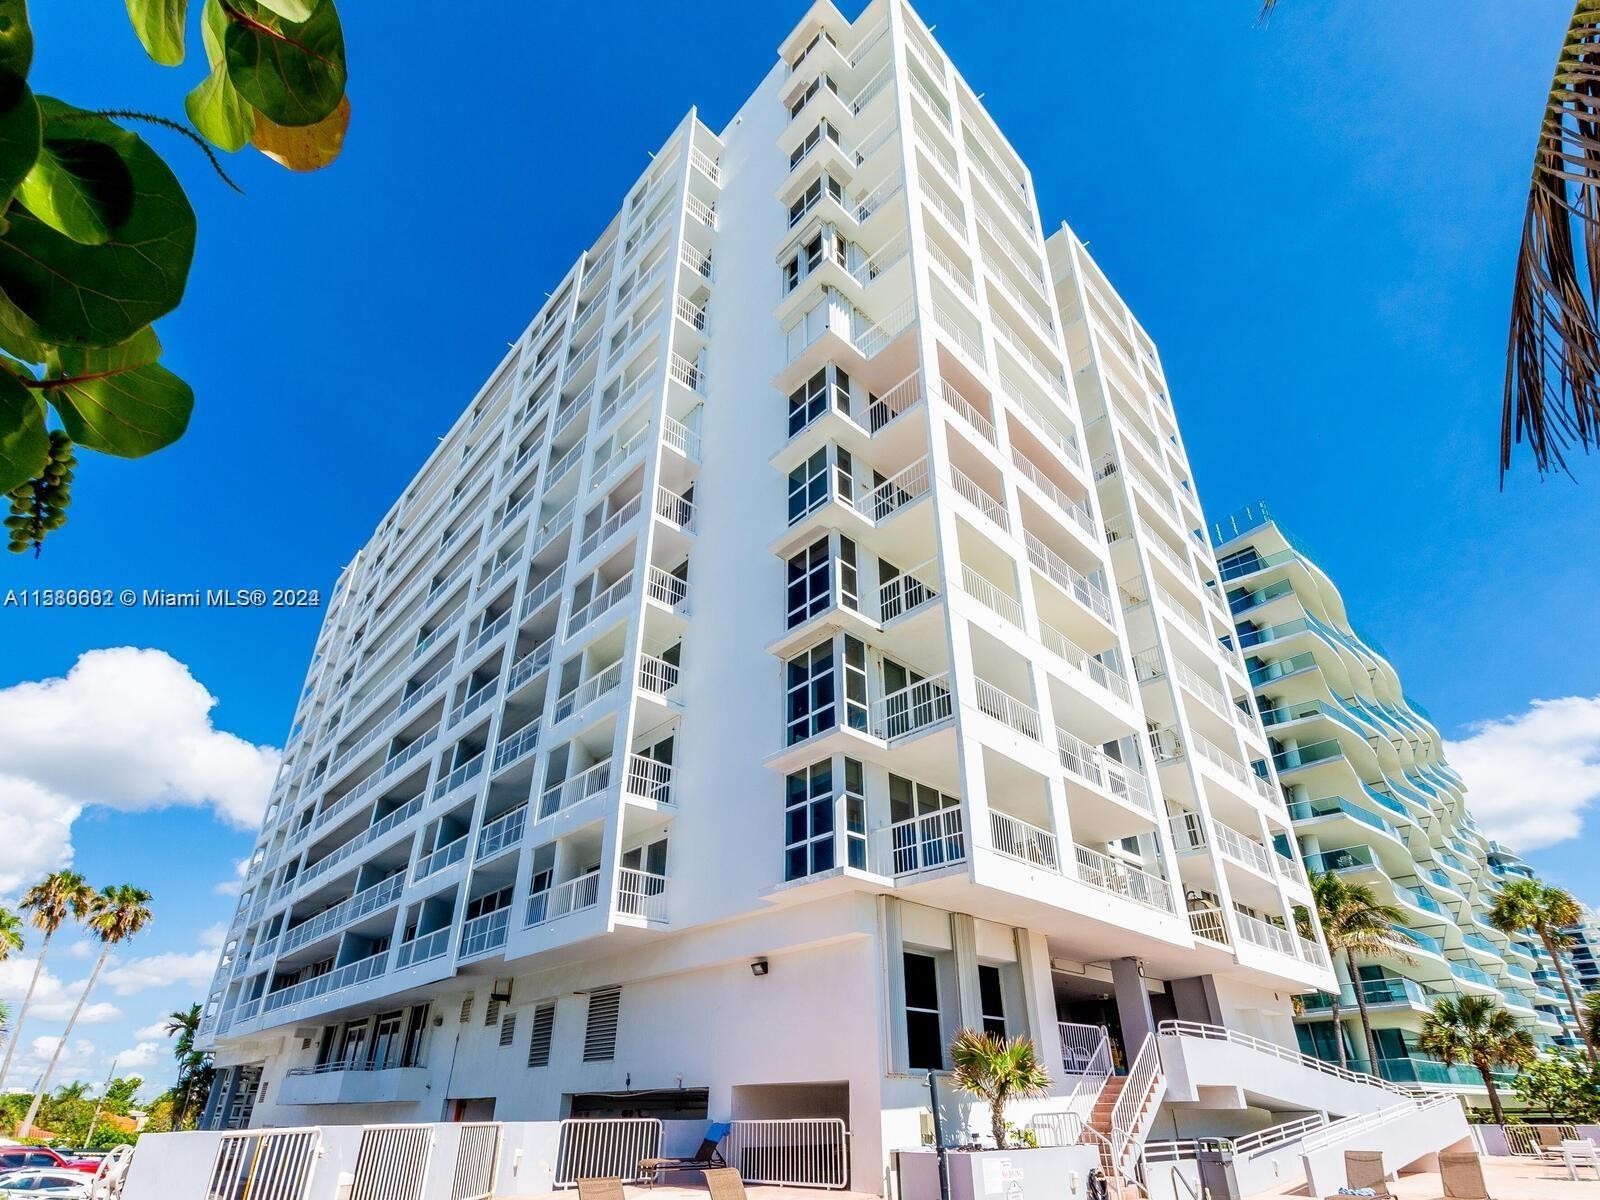 27. 9341 Collins Ave